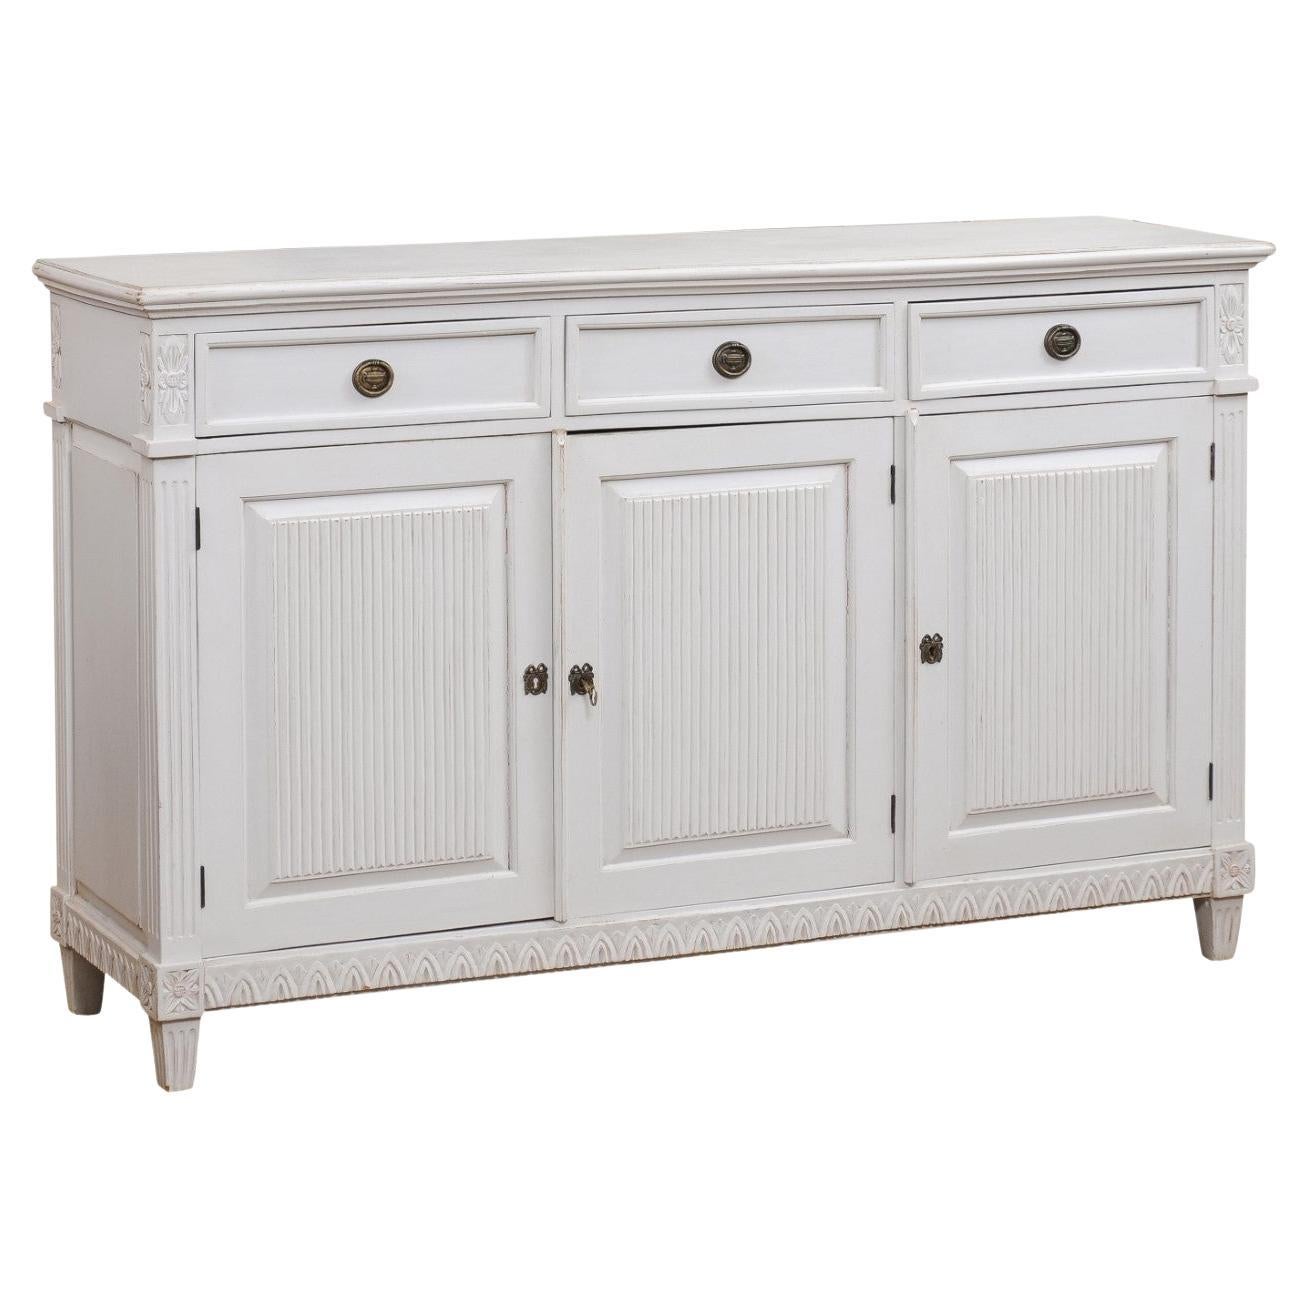 Swedish 1900s Gustavian Style Painted Sideboard with Three Drawers over Doors For Sale